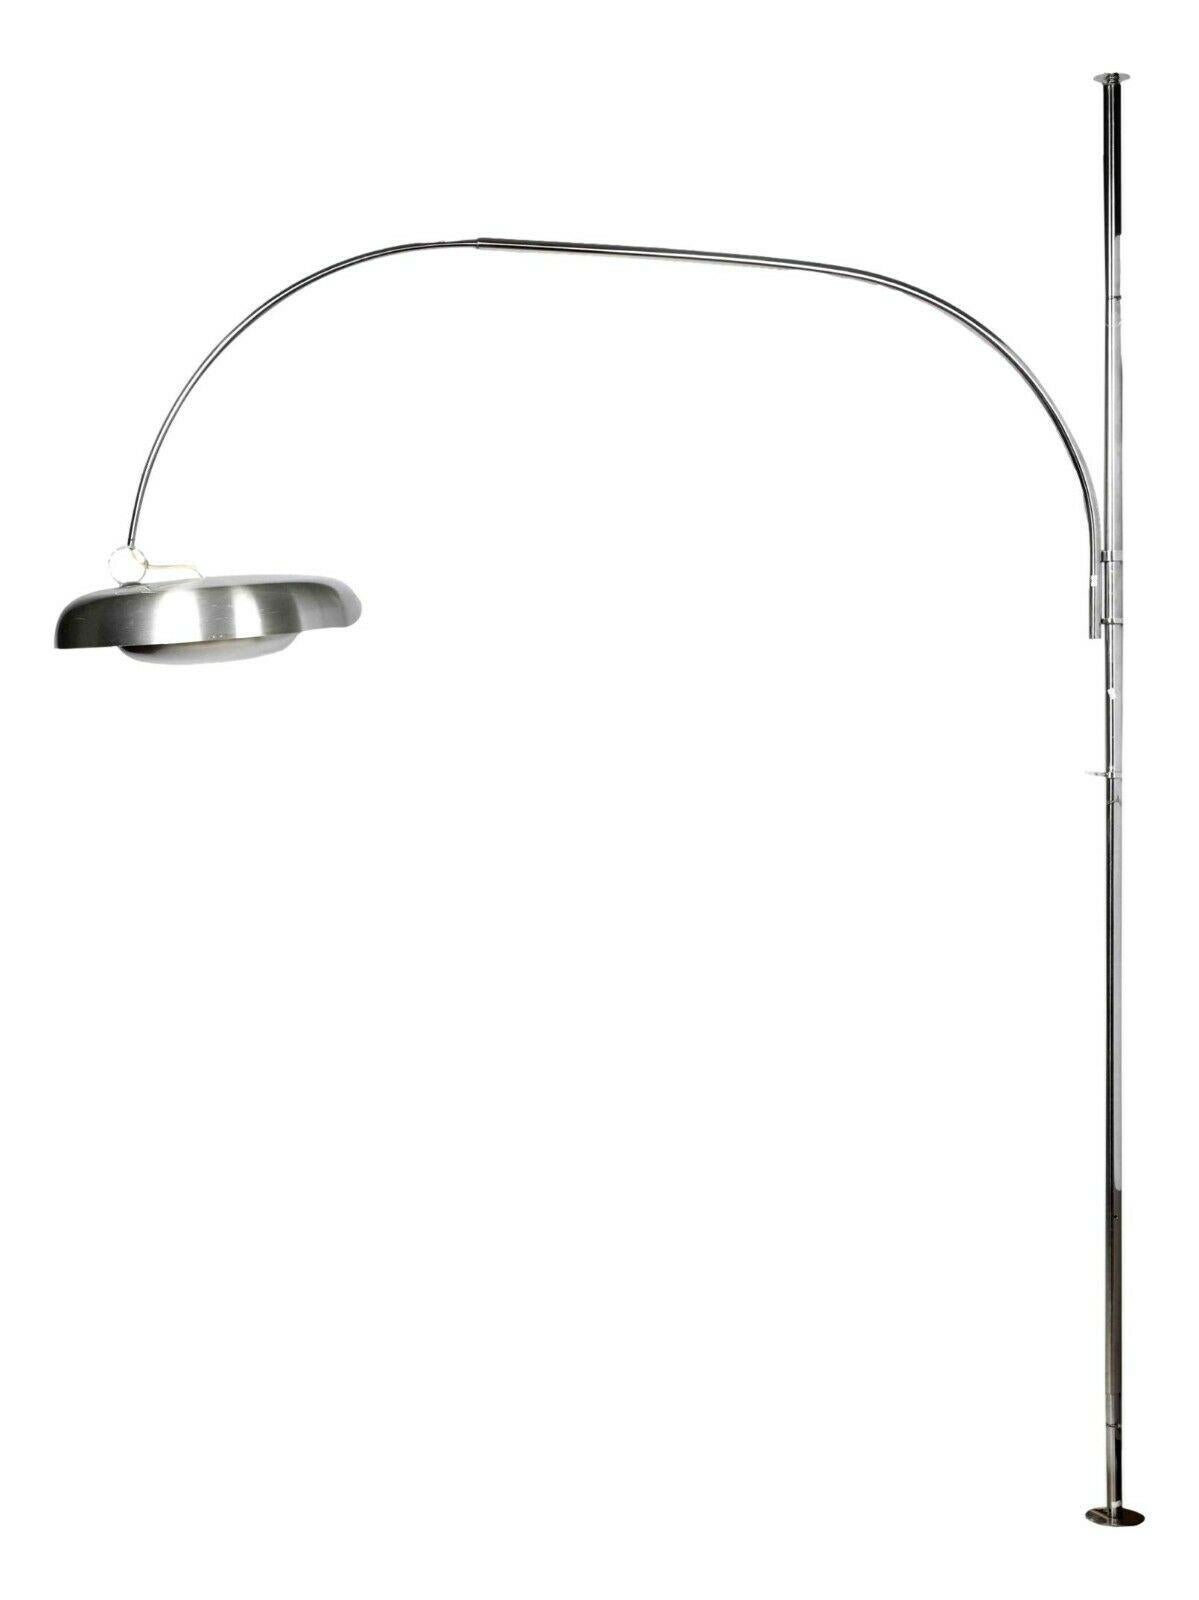 splendid and rare arched floor lamp, model PR, Sirrah production based on a design by Pirro Cuniberti, 1970s

Made of brushed steel, with height-adjustable aluminum diffuser

It measures approximately 320 cm in overall height, 280 cm projection,